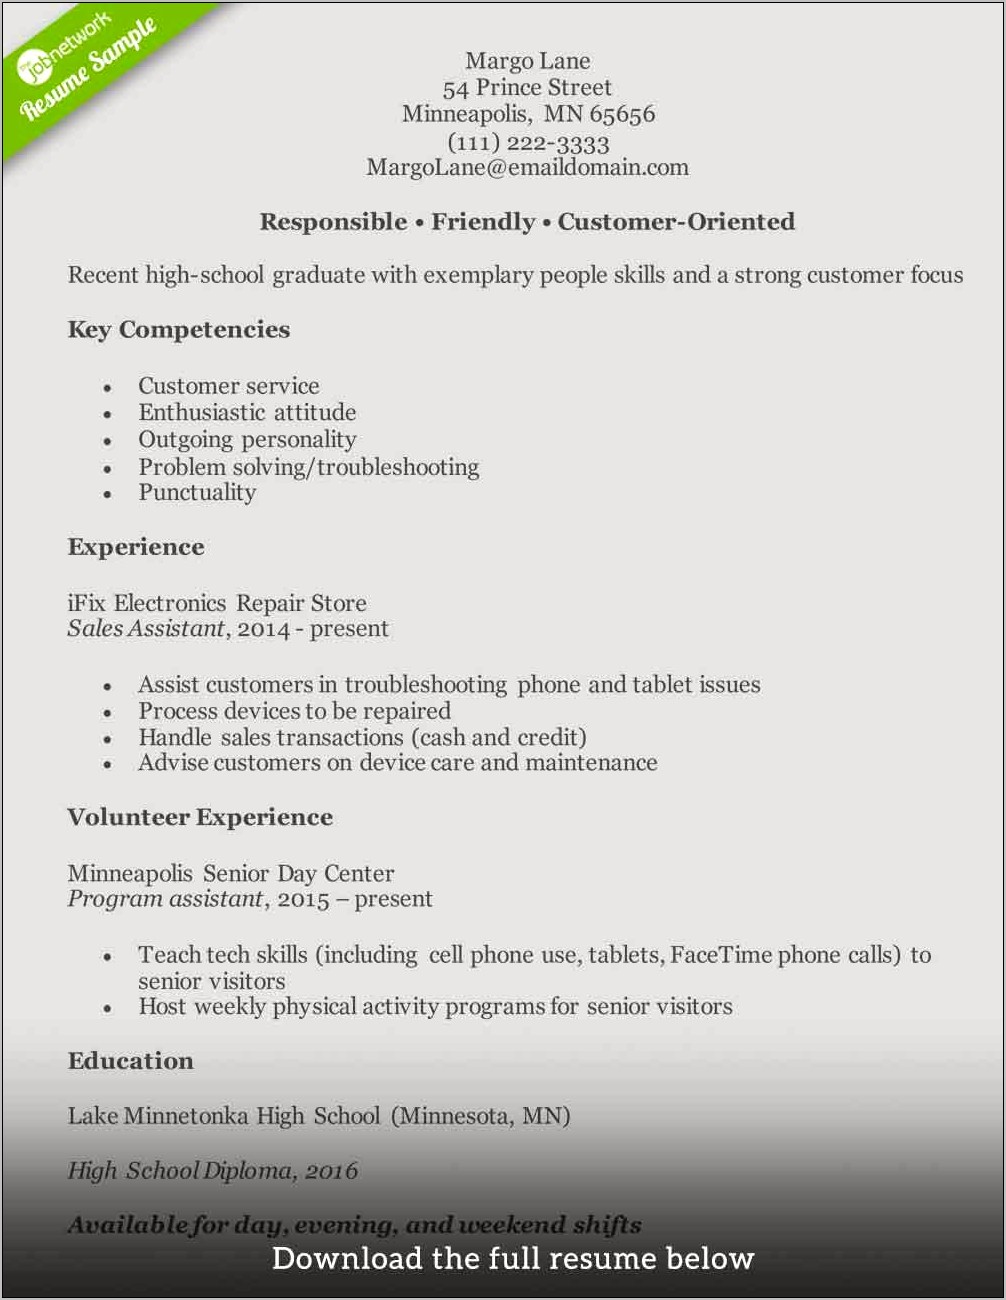 Sample Resumes For Entry Customer Service Jobs